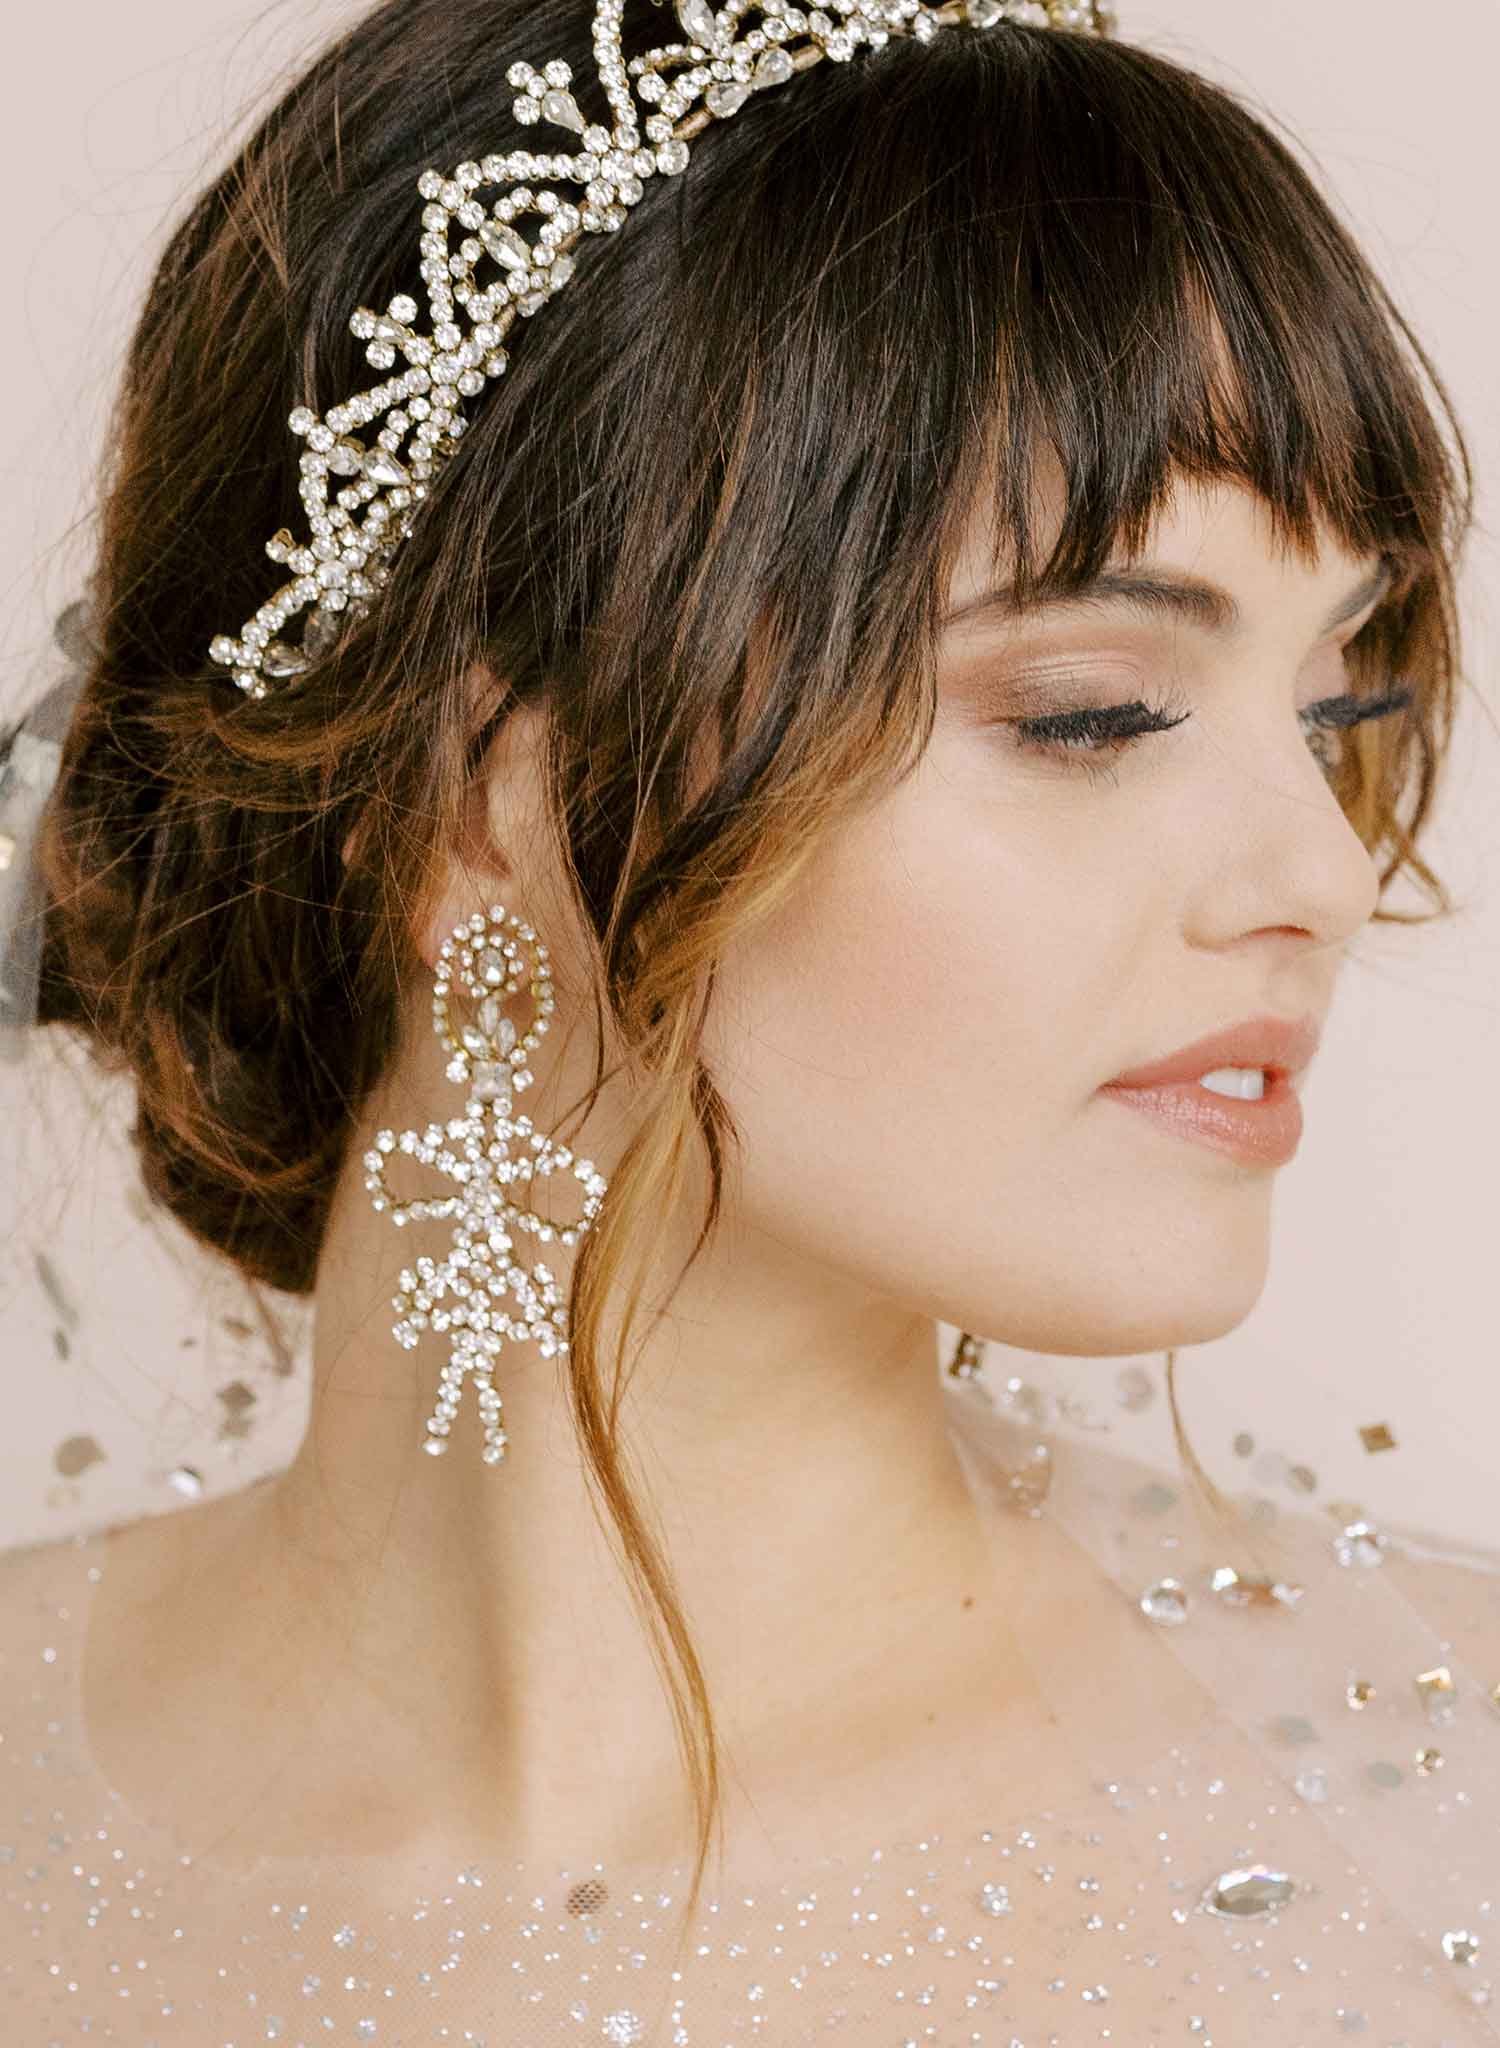 View All - Headpieces, Veils, Bridal gowns, Sashes, Garters, Headbands